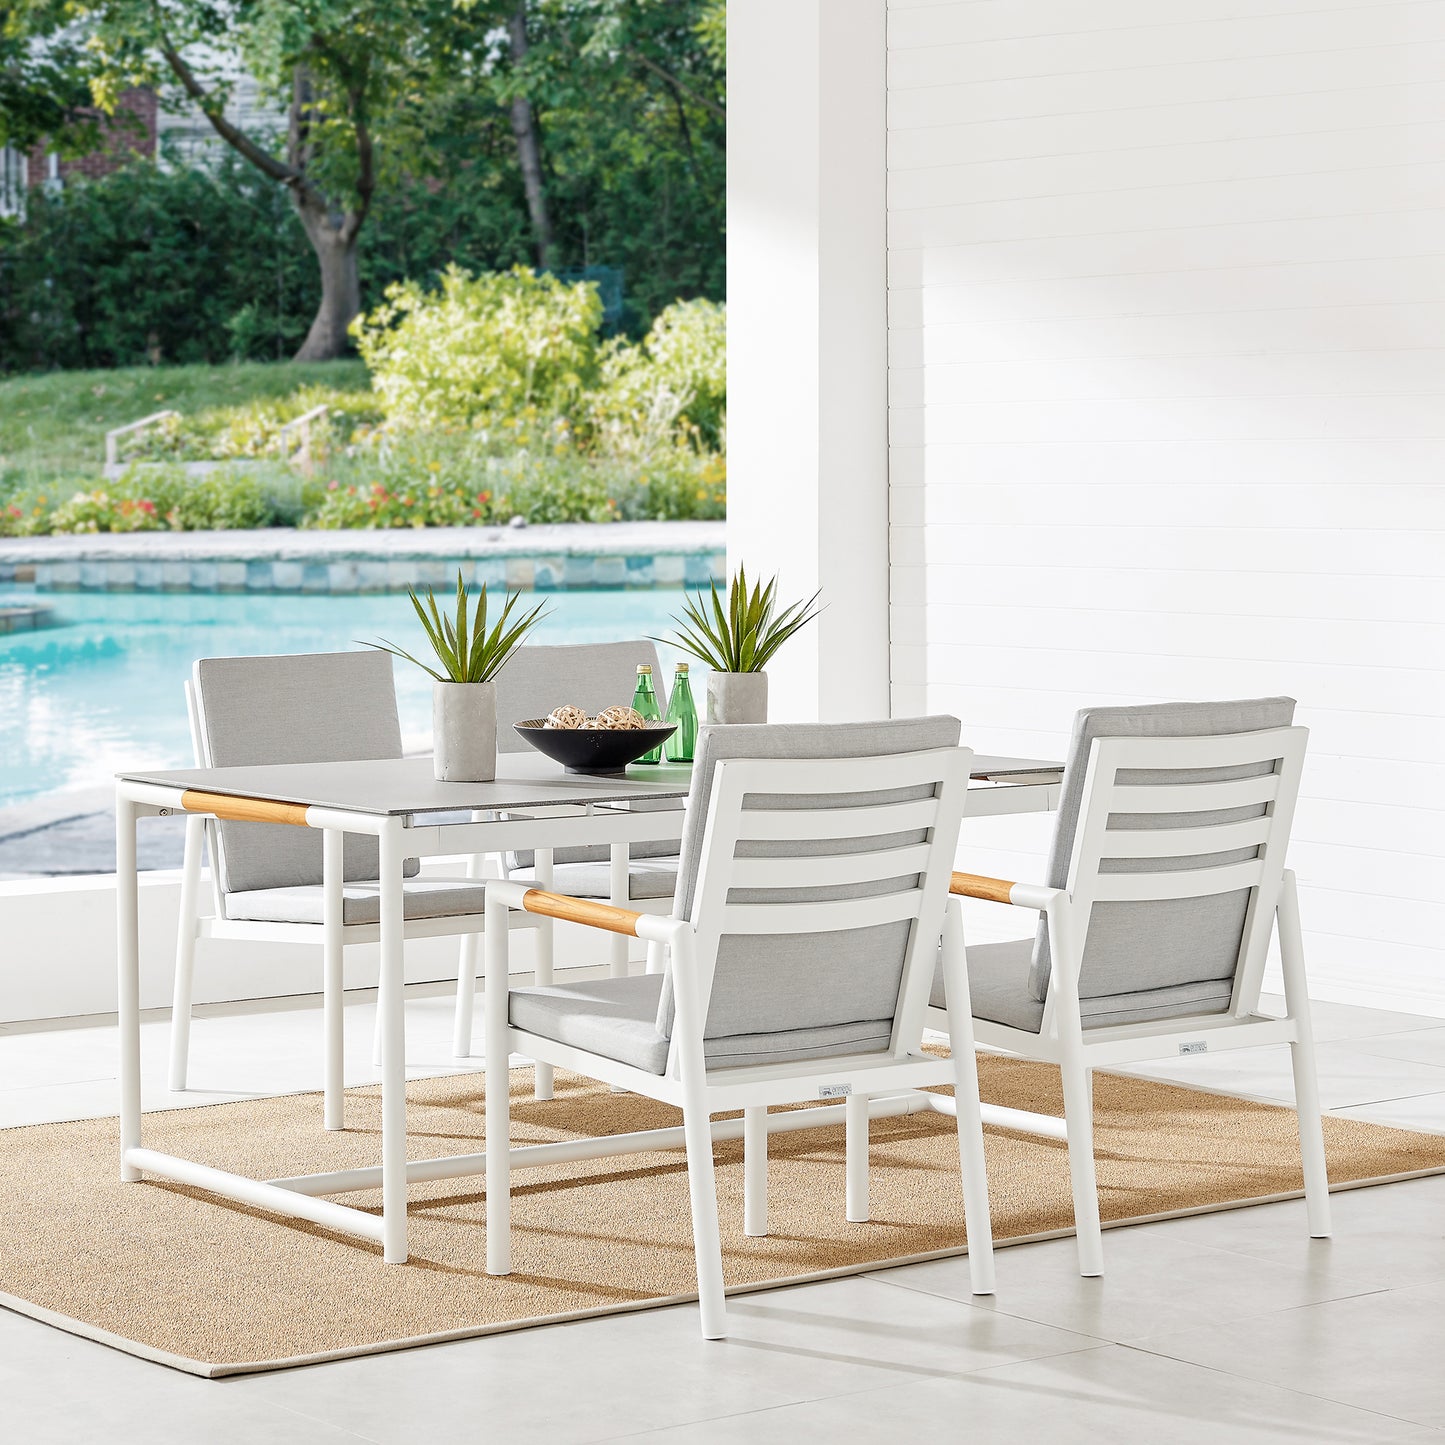 Crown White Aluminum and Teak Outdoor Dining Table with Stone Top